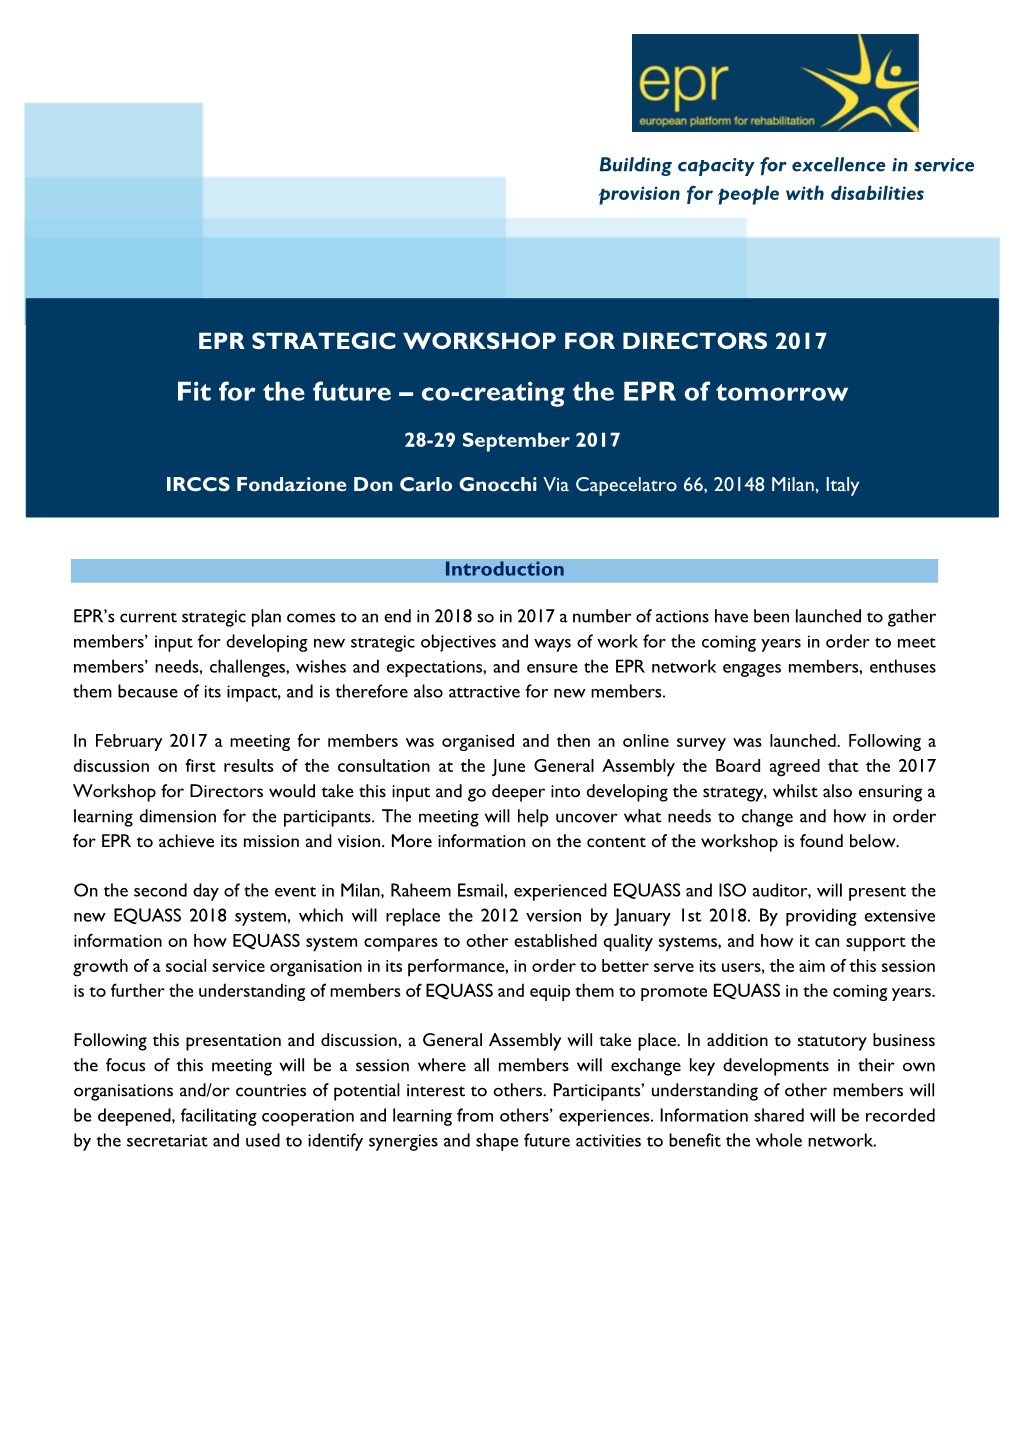 Fit for the Future – Co-Creating the EPR of Tomorrow